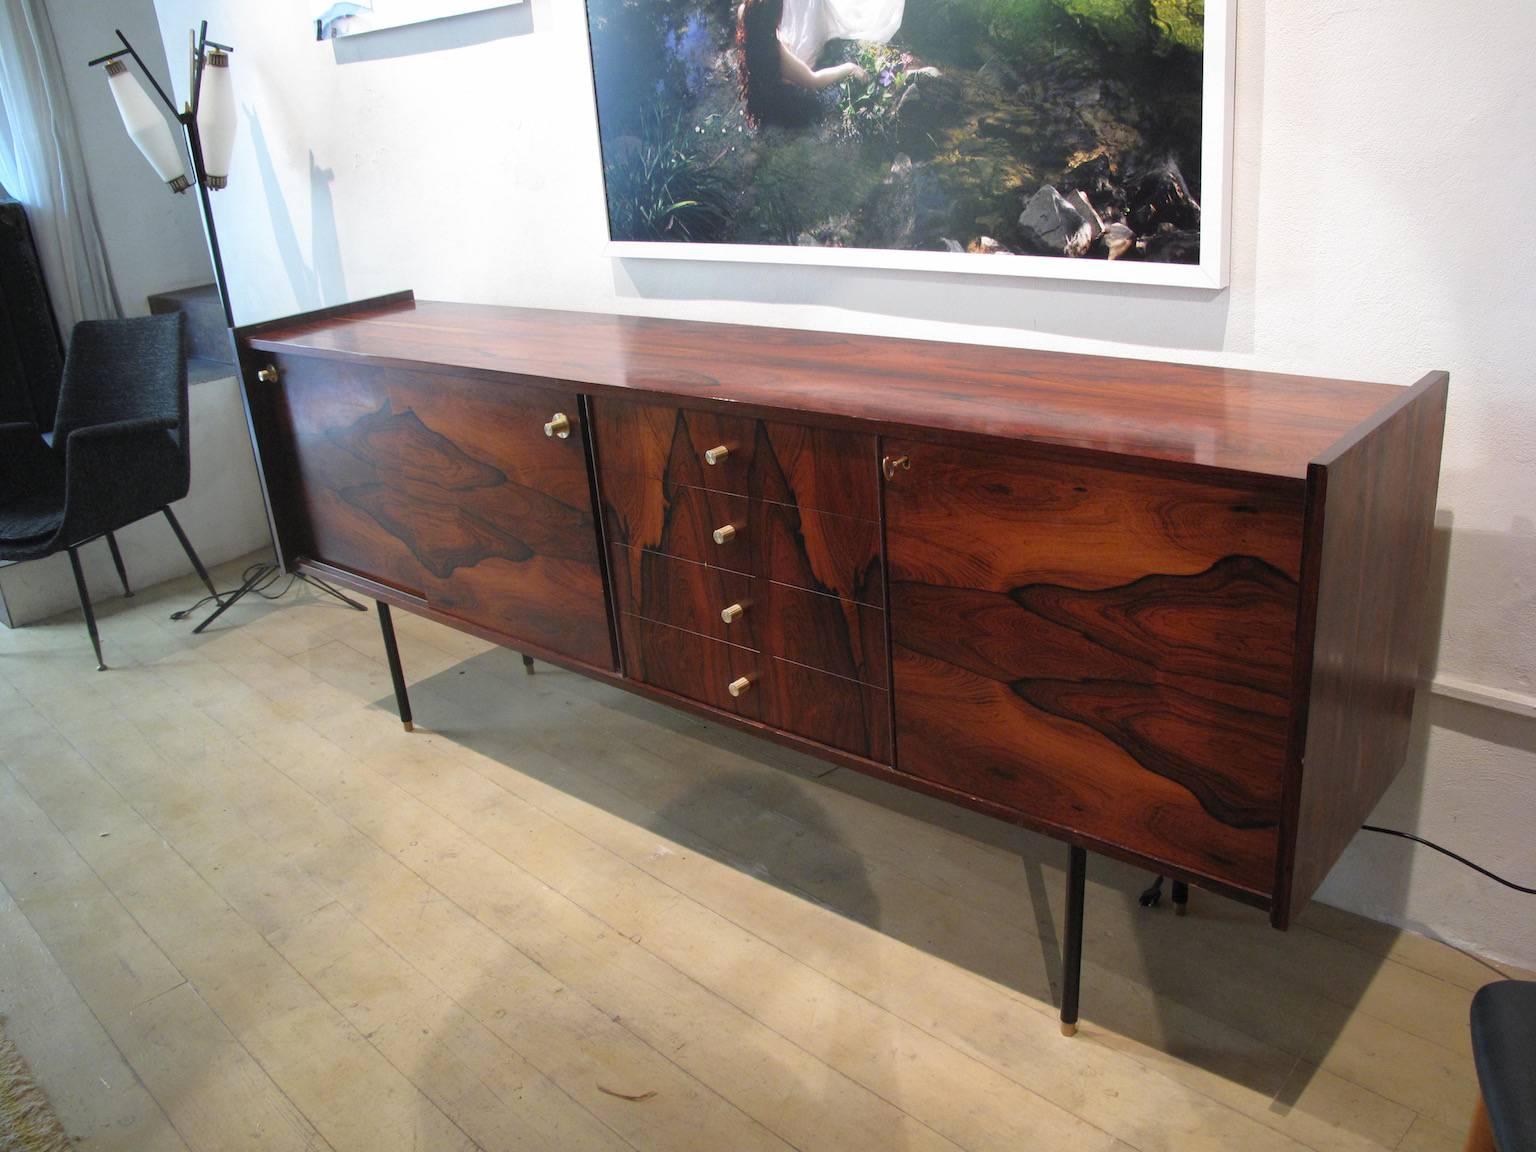 Elegant Italian walnut briar-root sideboard, slender iron legs and brass handles. In perfect condition, 1950-1960.